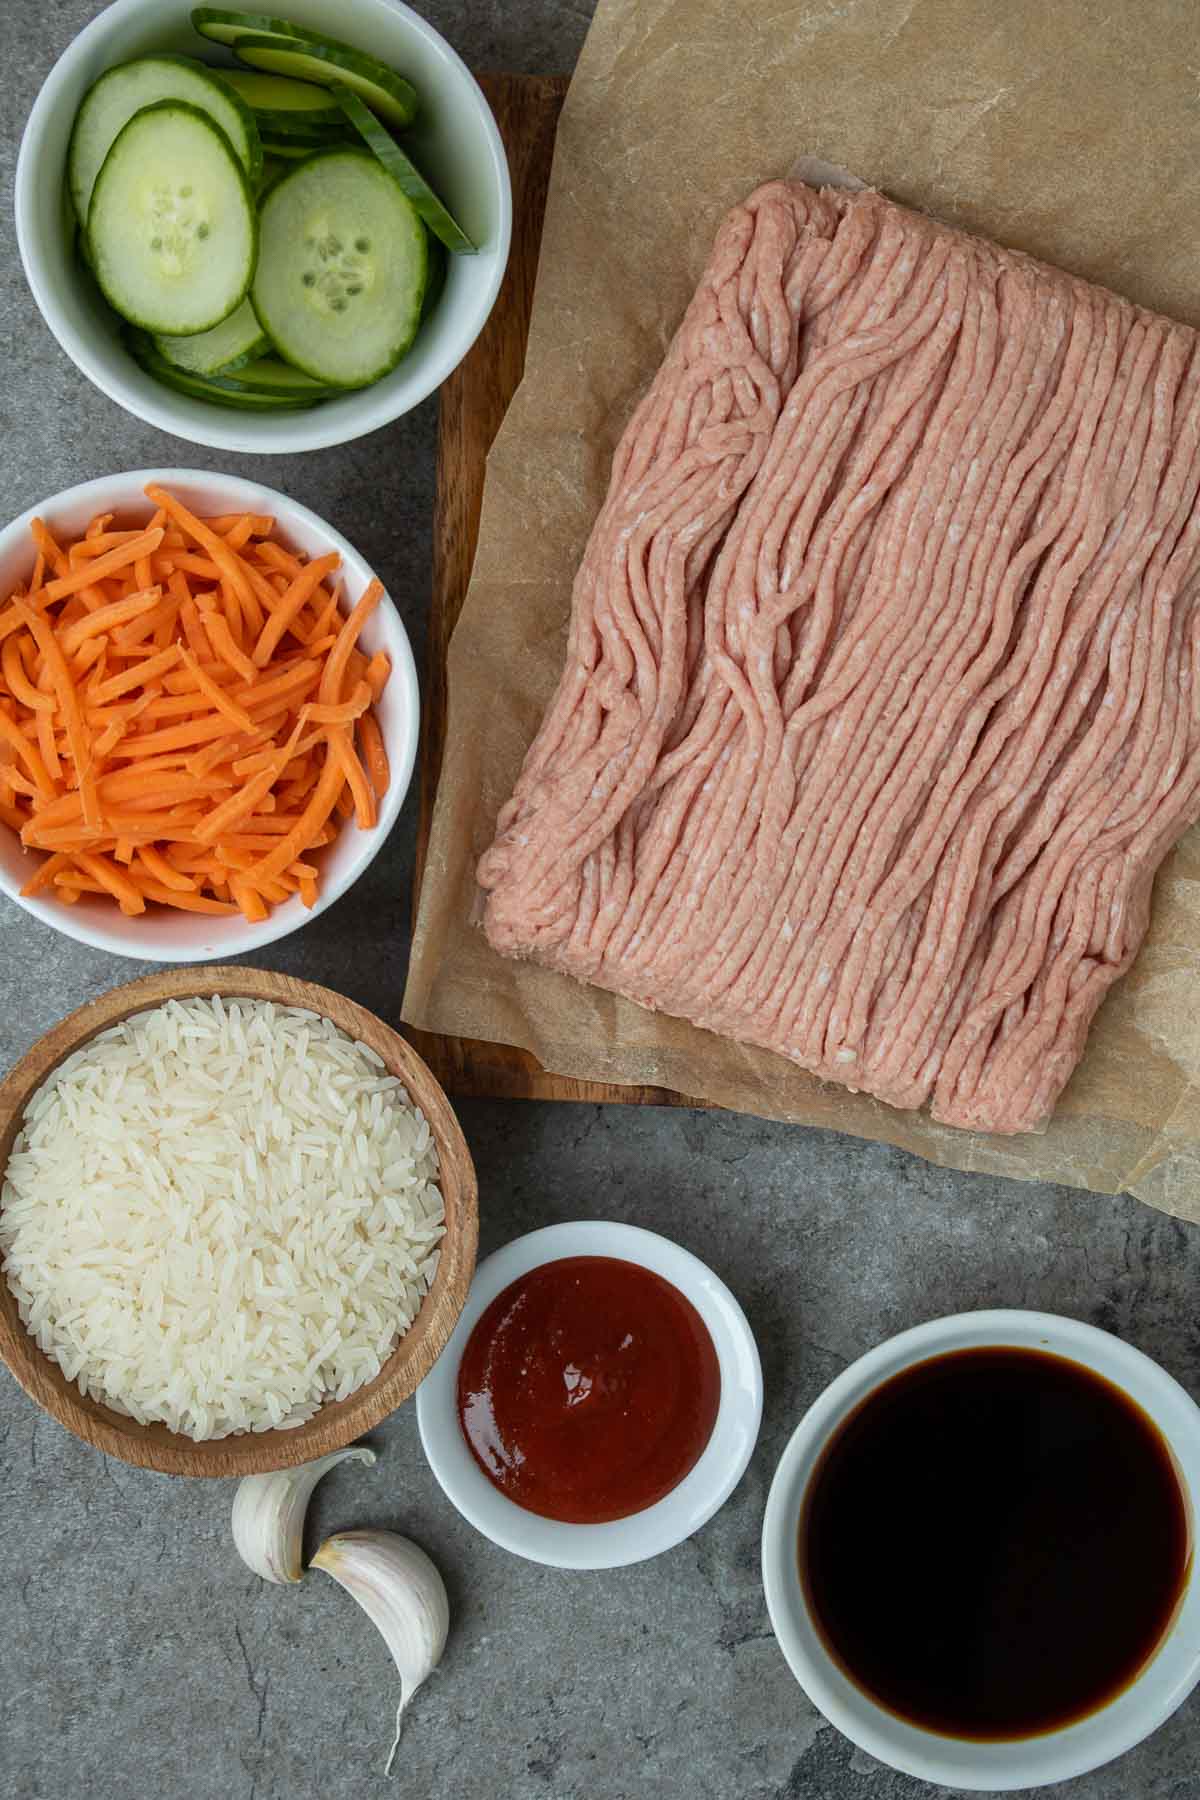 Ingredients for Korean ground turkey rice bowl recipe; ground turkey, soy sauce, gochujang, garlic, rice, shredded carrots, and sliced cucumber.